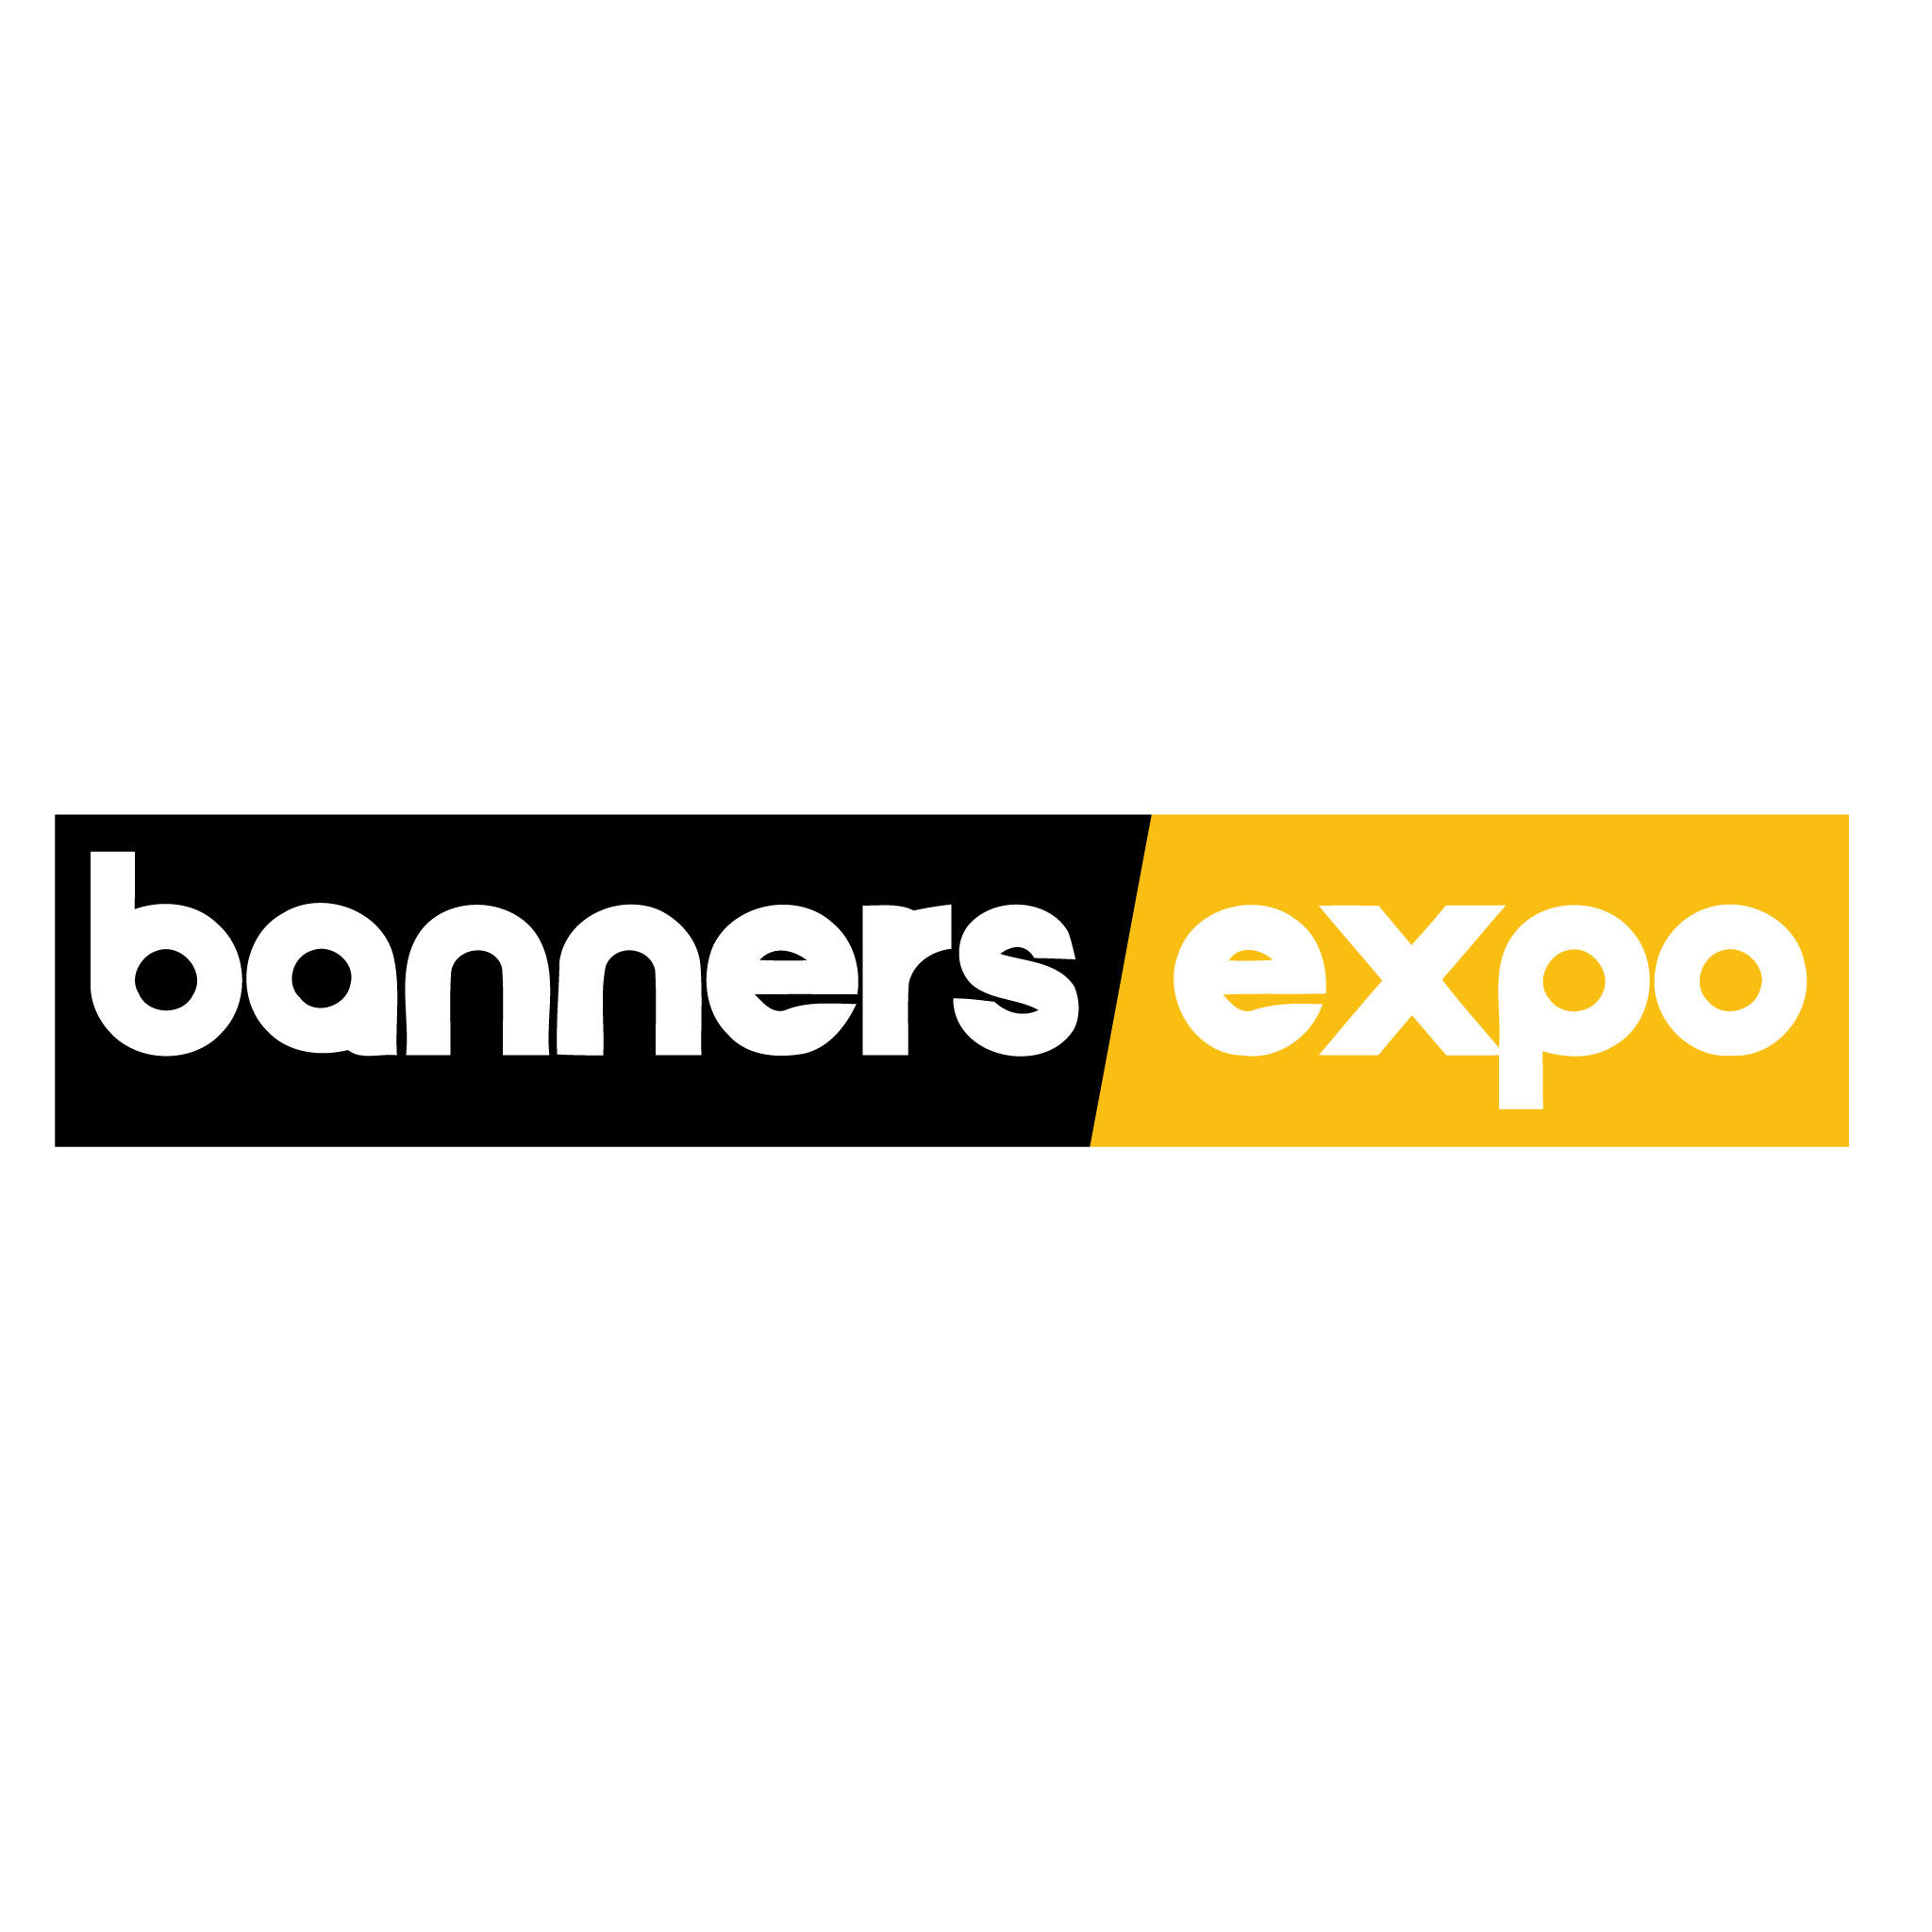 Banners Expo